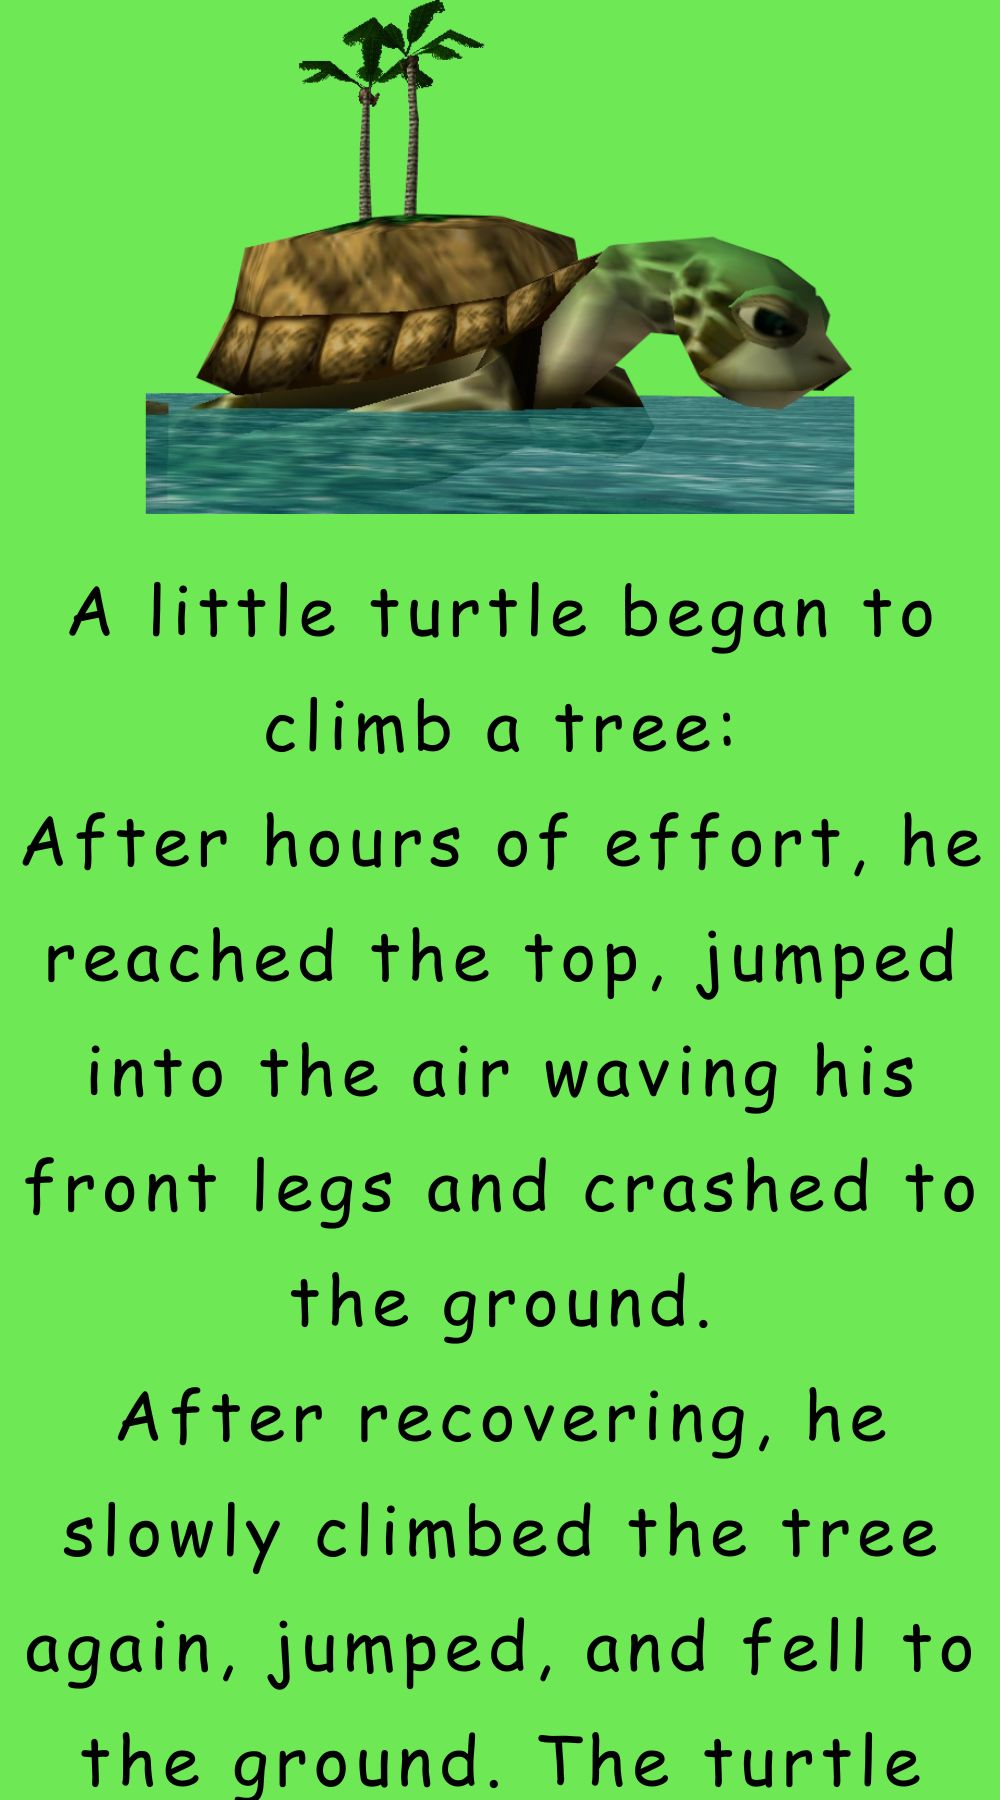 A little turtle began to climb a tree